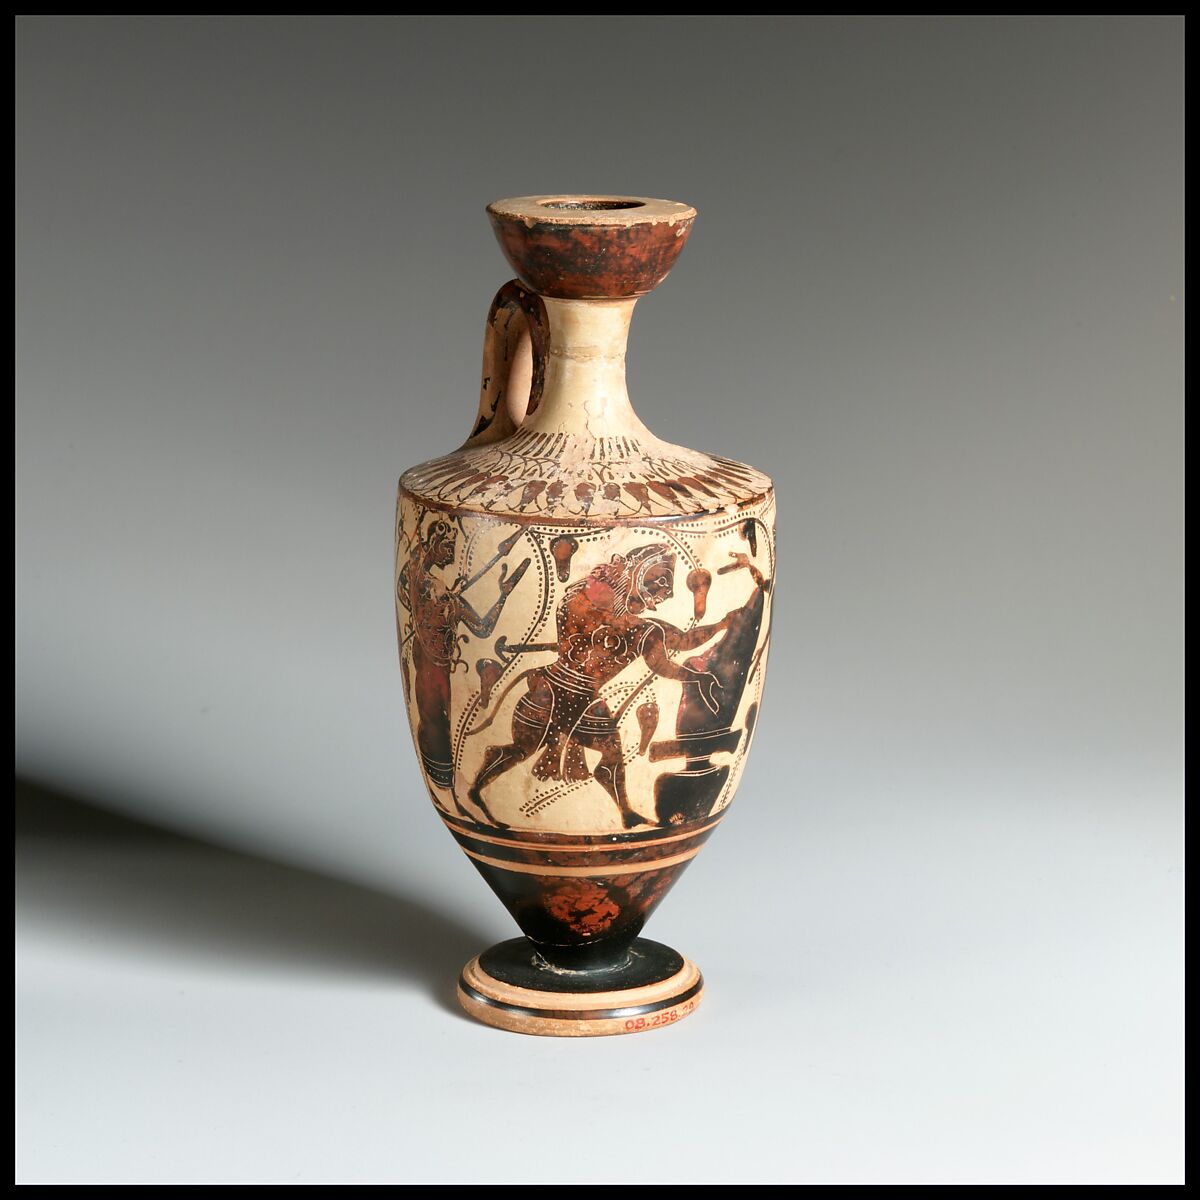 Terracotta lekythos (oil flask), Attributed to the Class of Athens 581.1, Terracotta, Greek, Attic 